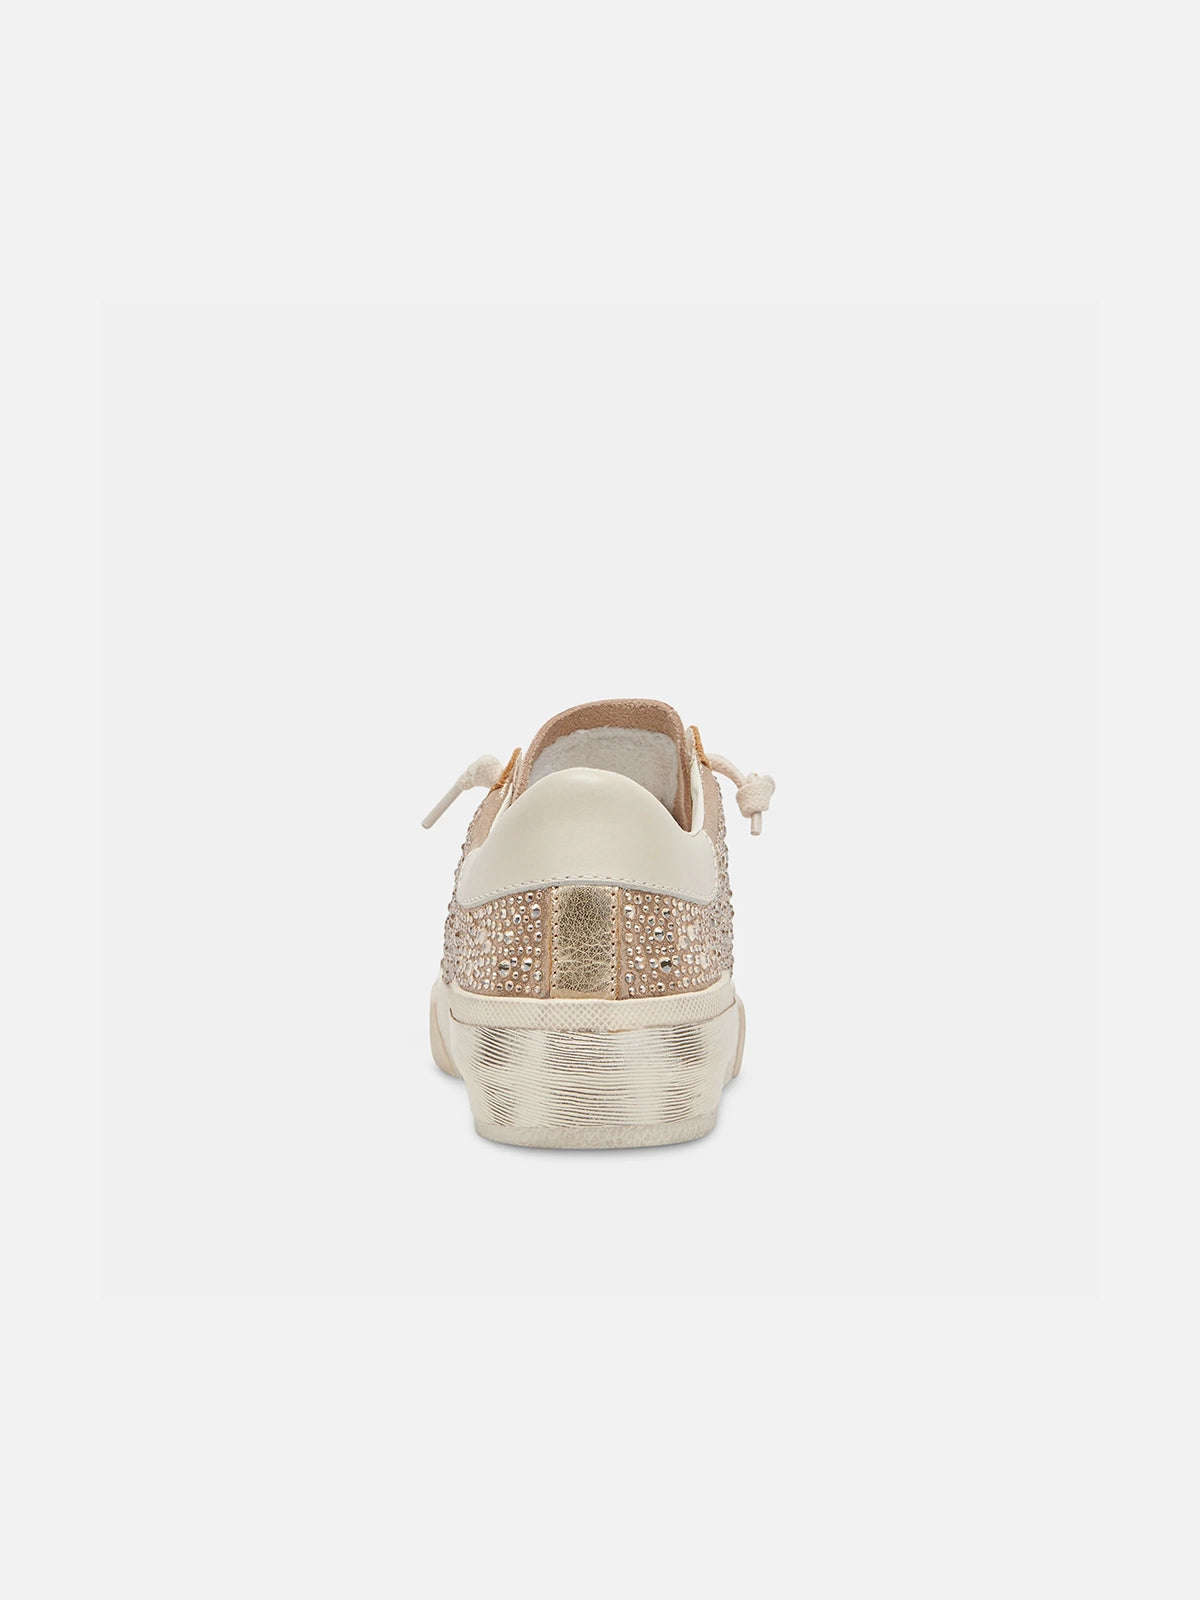 dolce vita zina crystal sneakers in gold suede